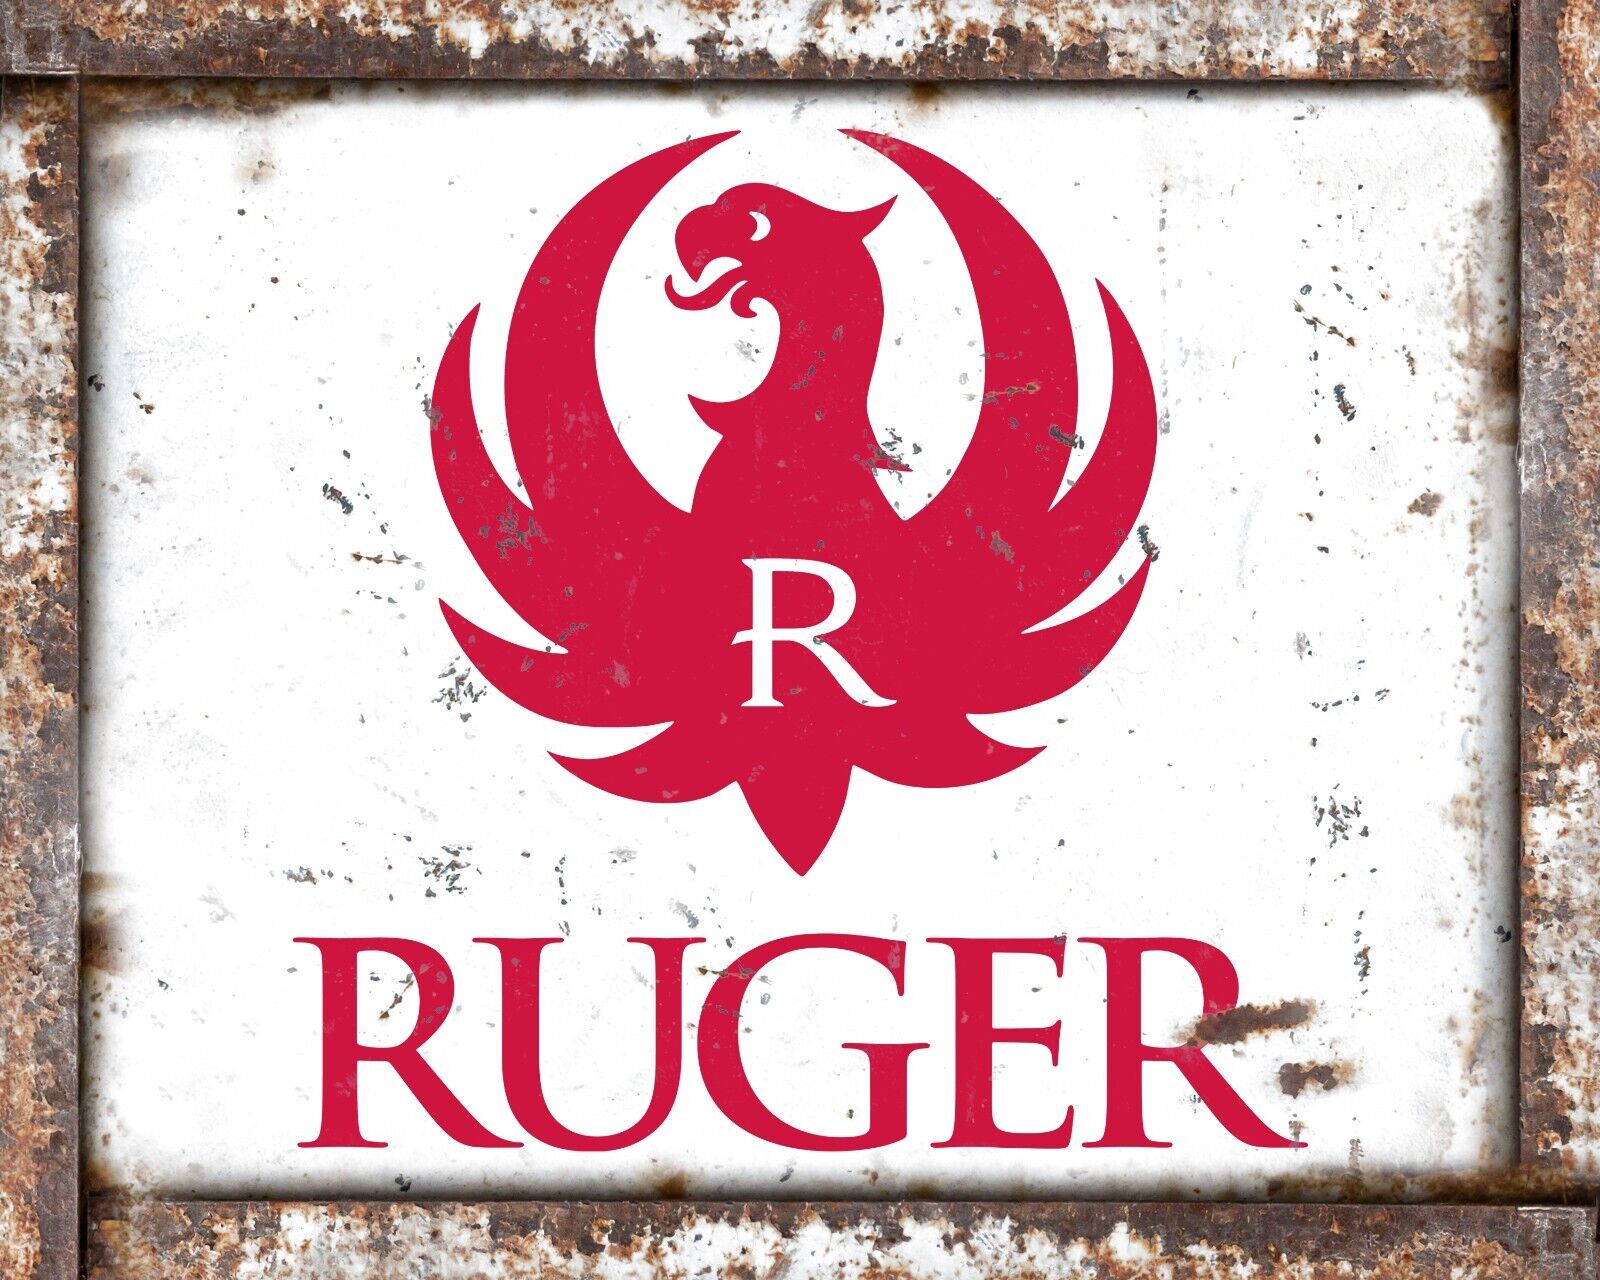 Ruger Firearms Red Phoenix 8x10 Rustic Vintage Style Tin Sign Metal Poster